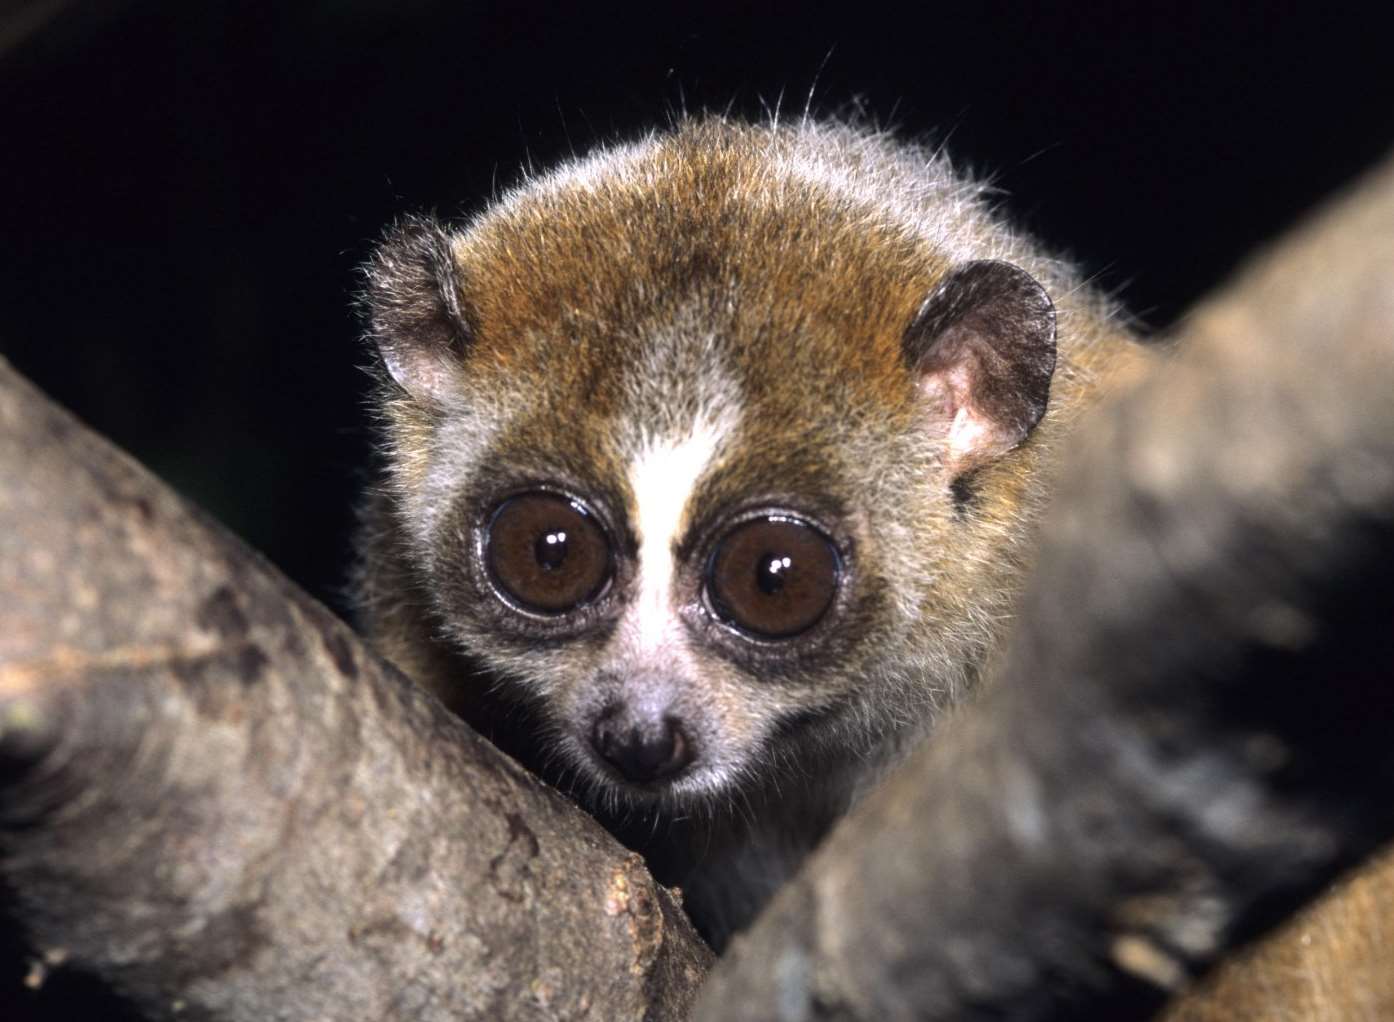 The pygmy slow loris looks cute but can deliver a deadly bite. Picture: David Haring/Duke Lemur Center, North Carolina/Wikimedia Commons